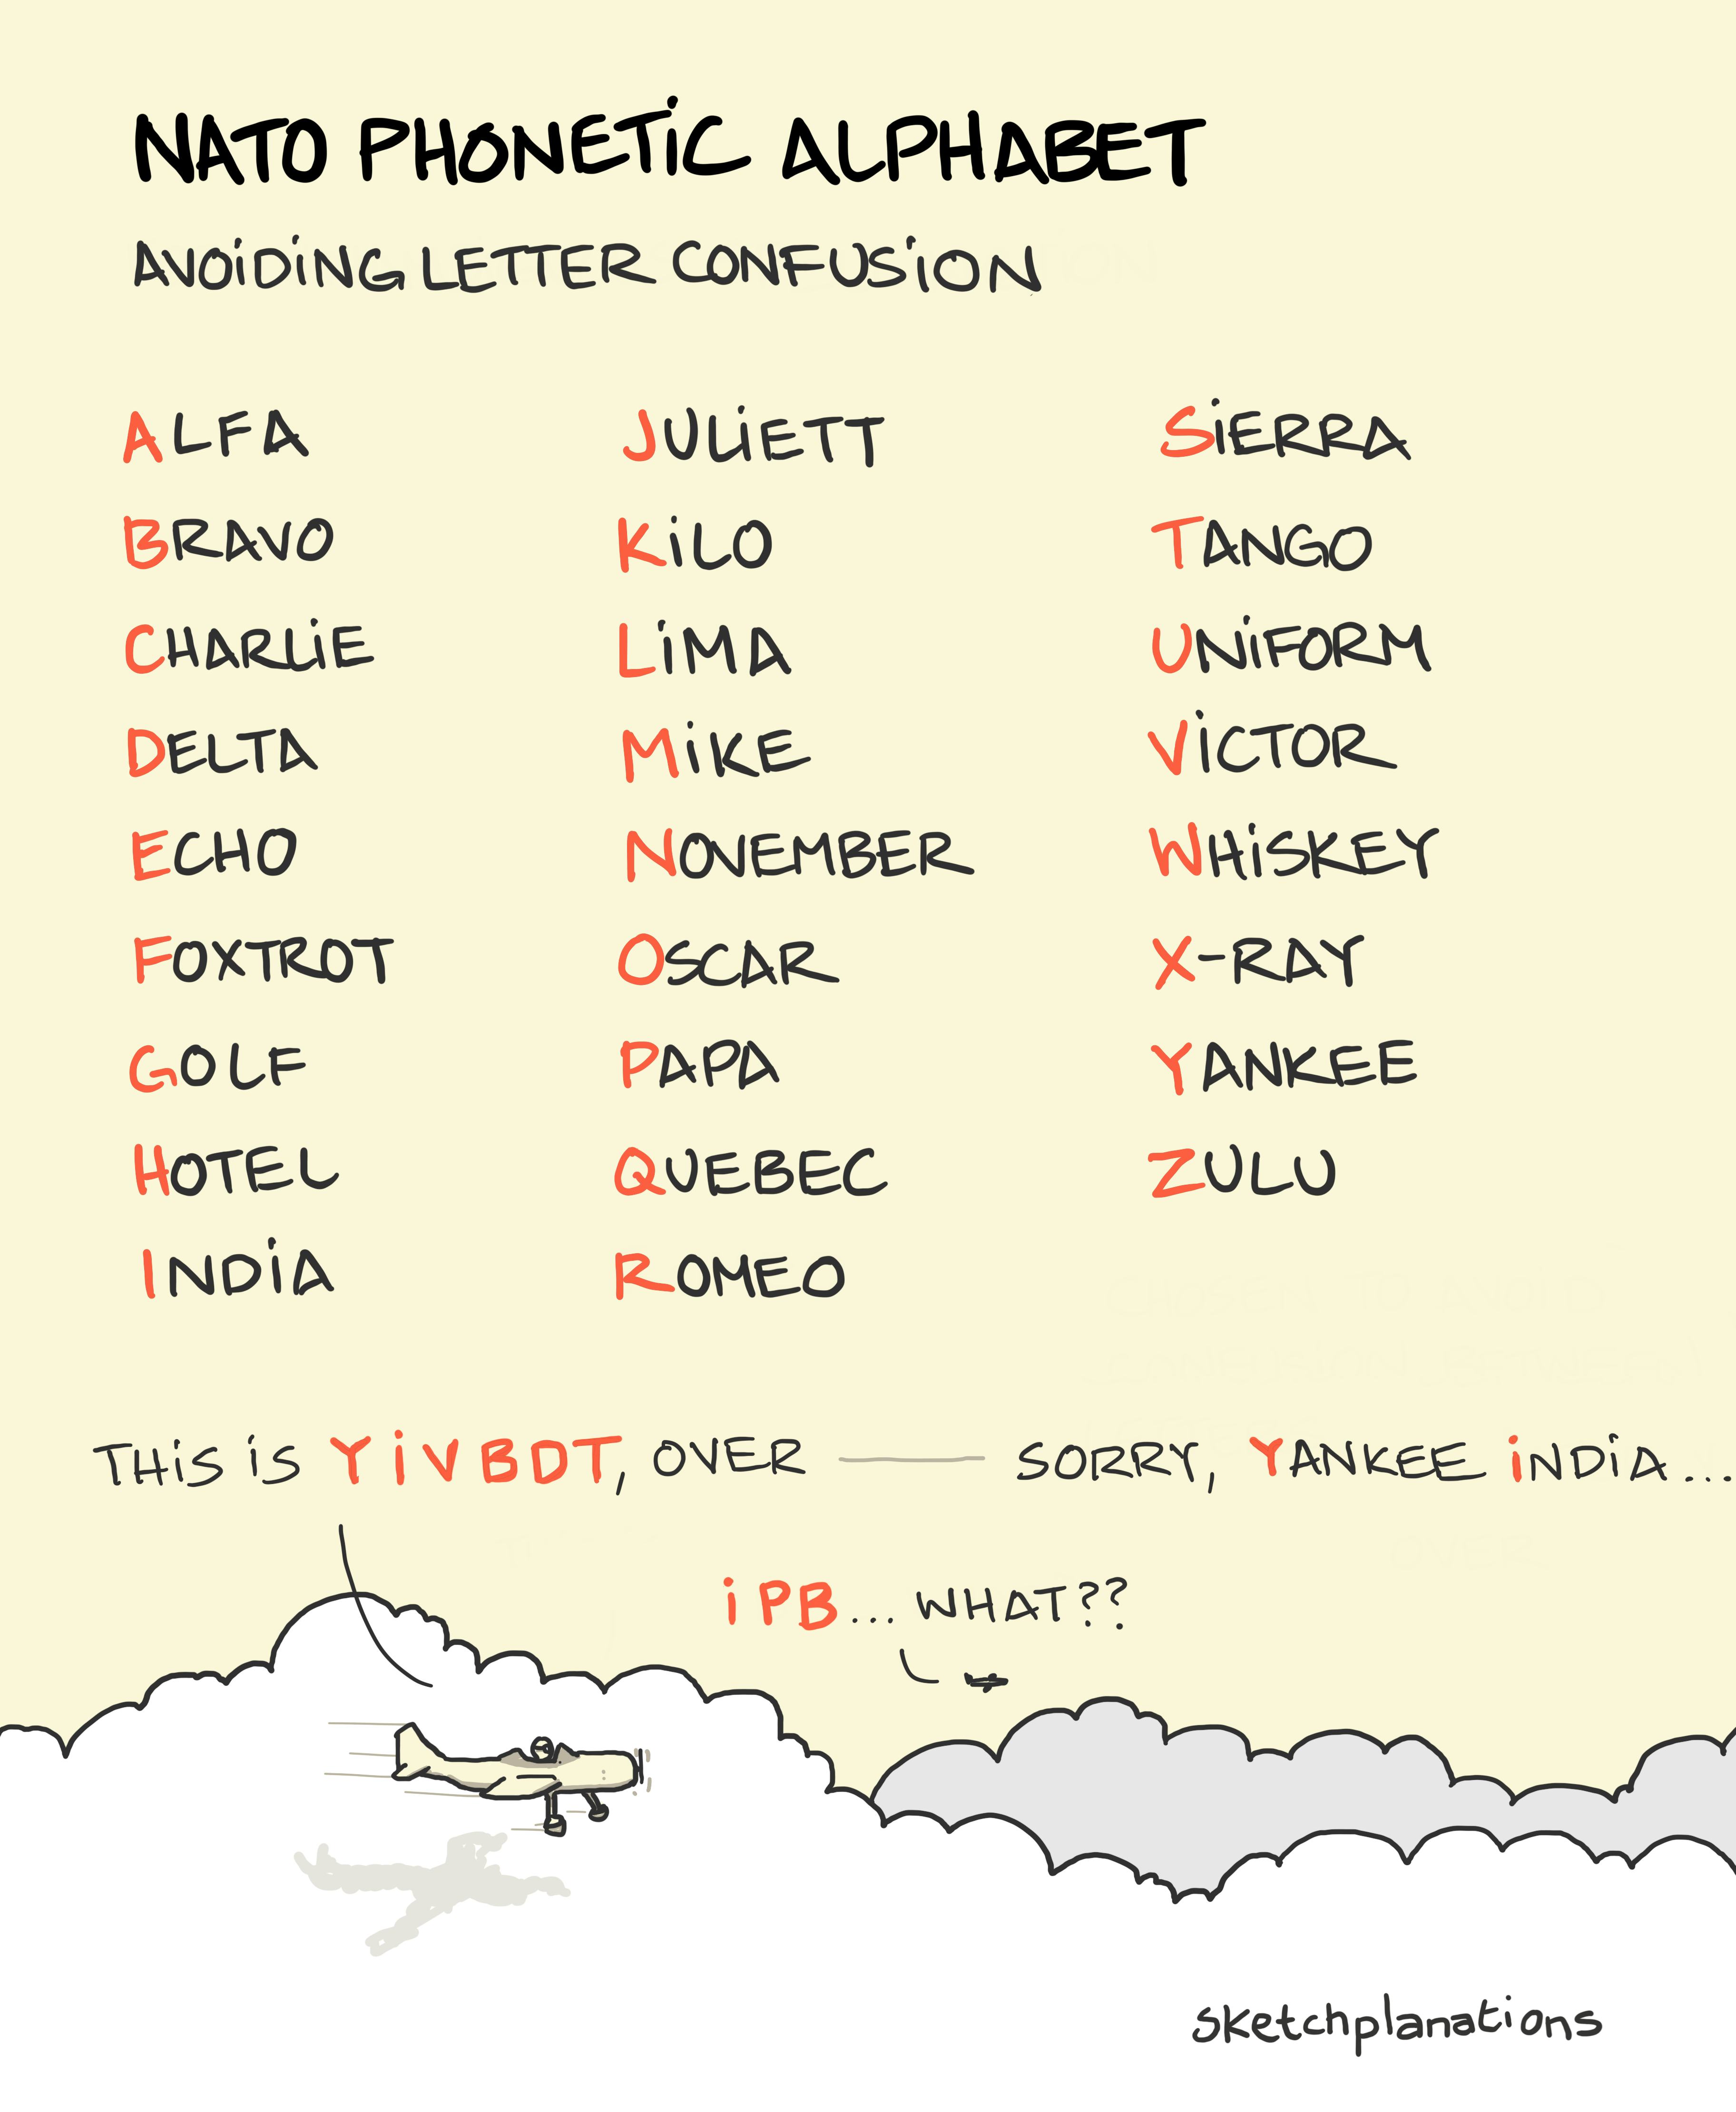 The phonetic alphabet helping two pilots correctly identify Y I V B D T which is easily misheard